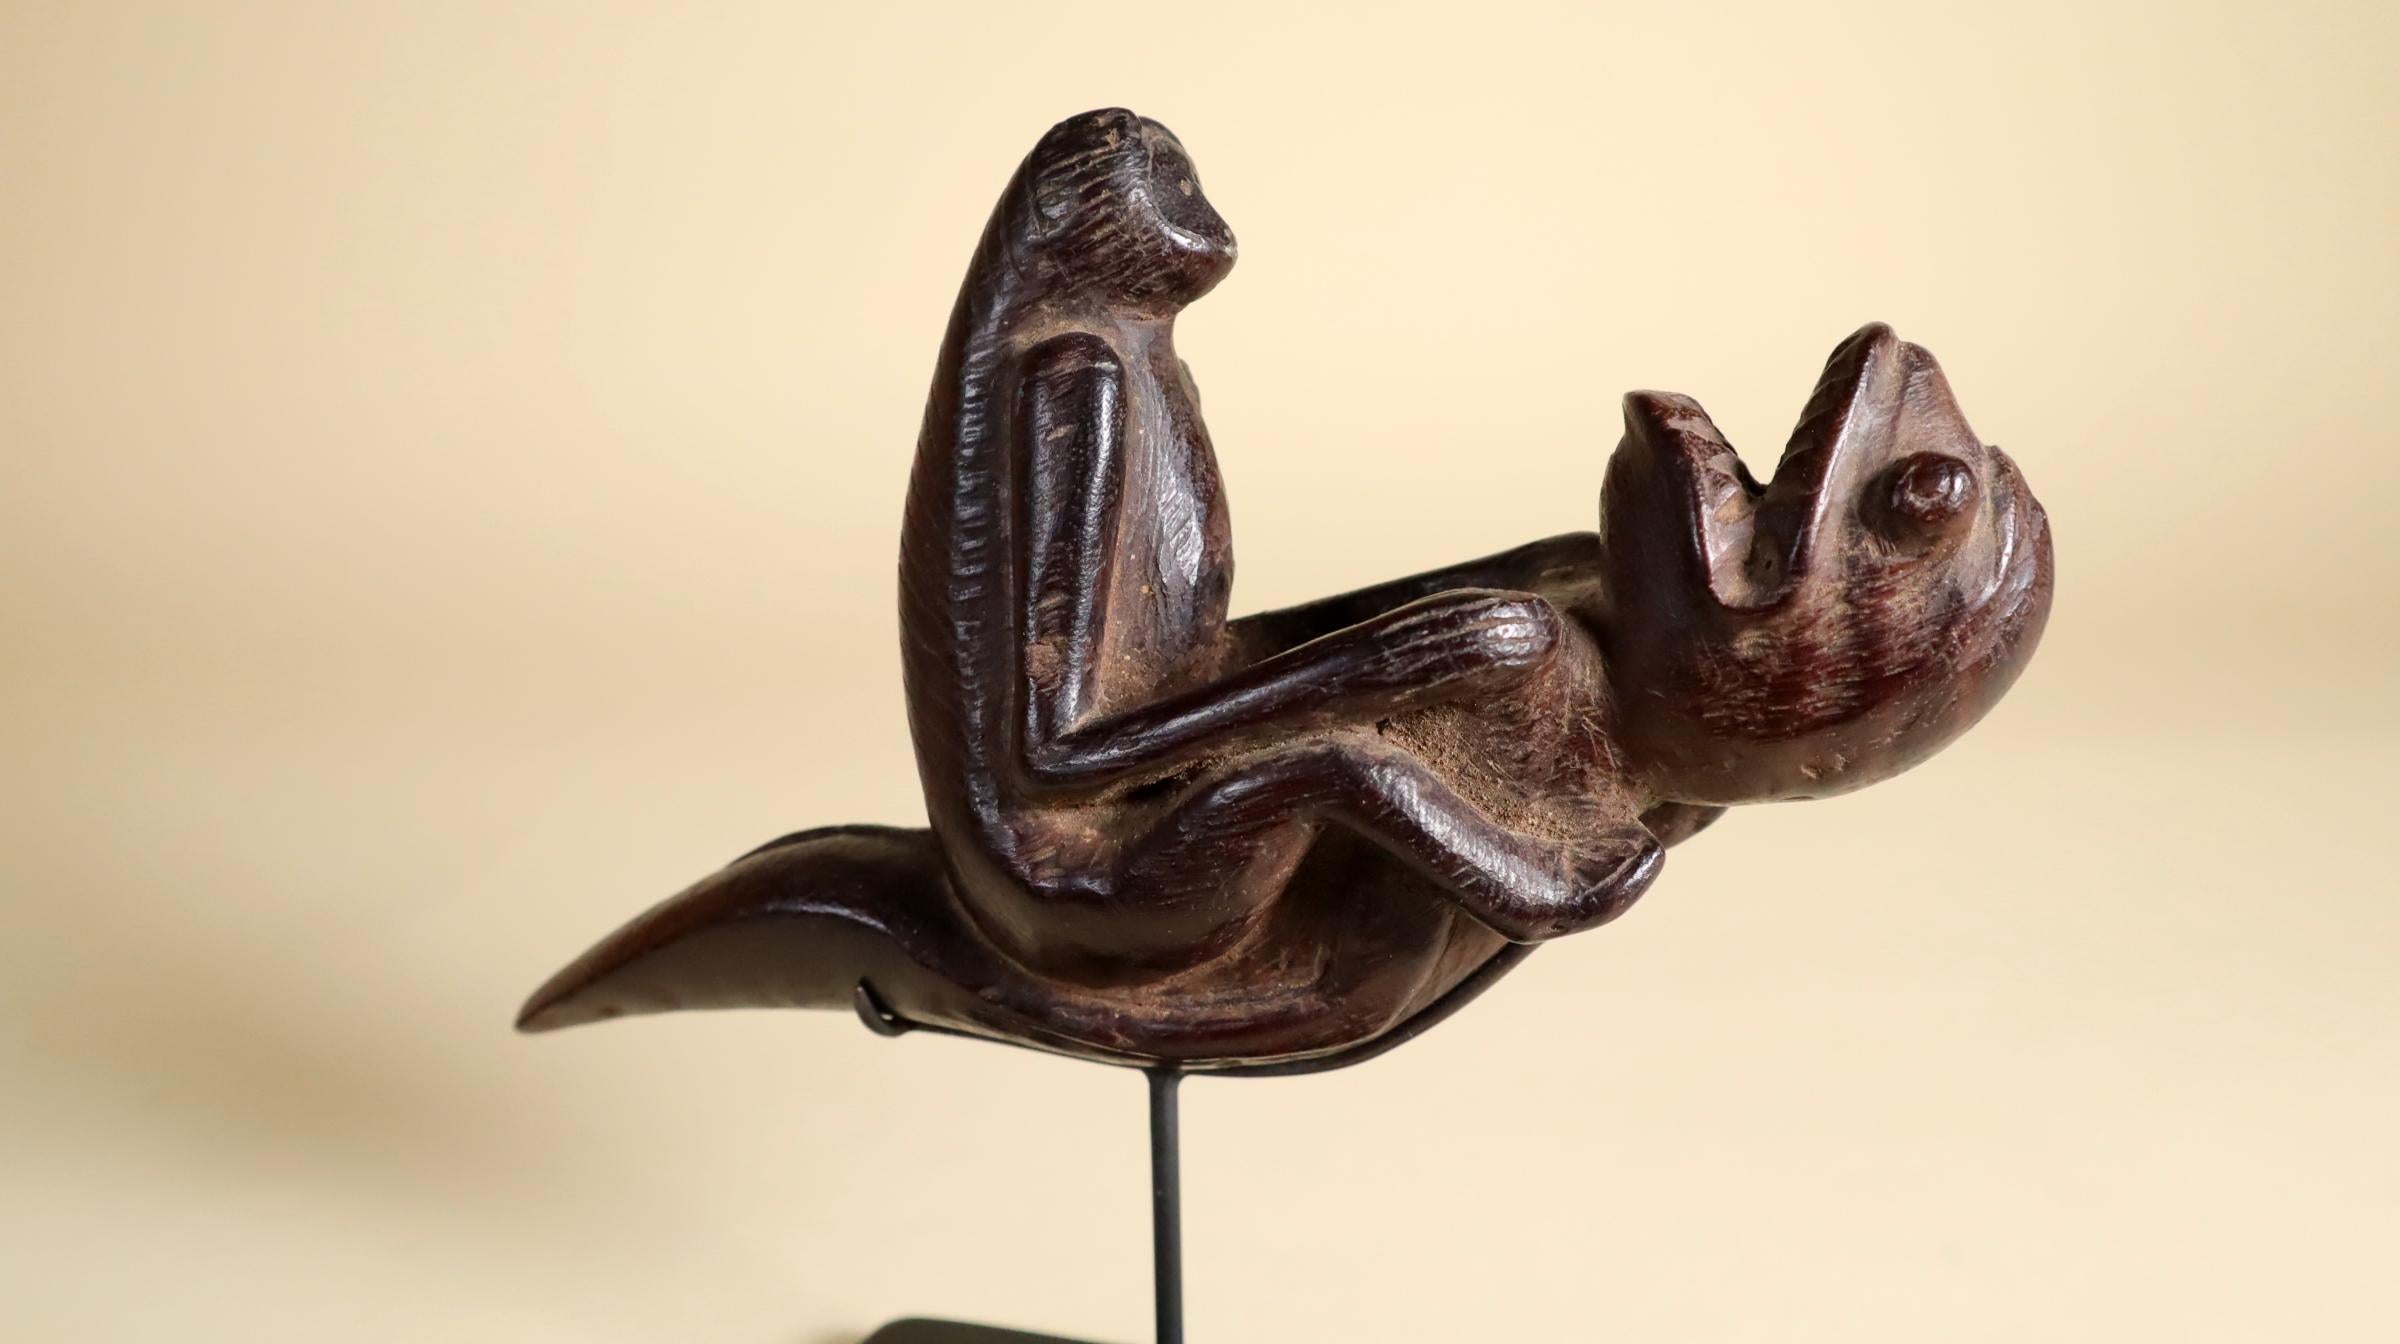 A whimsical and unique carved wood pipe from Indonesia, probably Sumatra, 20th century. A fantastical image of a monkey riding on the belly of a sea monster! Carved from a very hardwood with a black patina from handling.
Comes with a custom metal